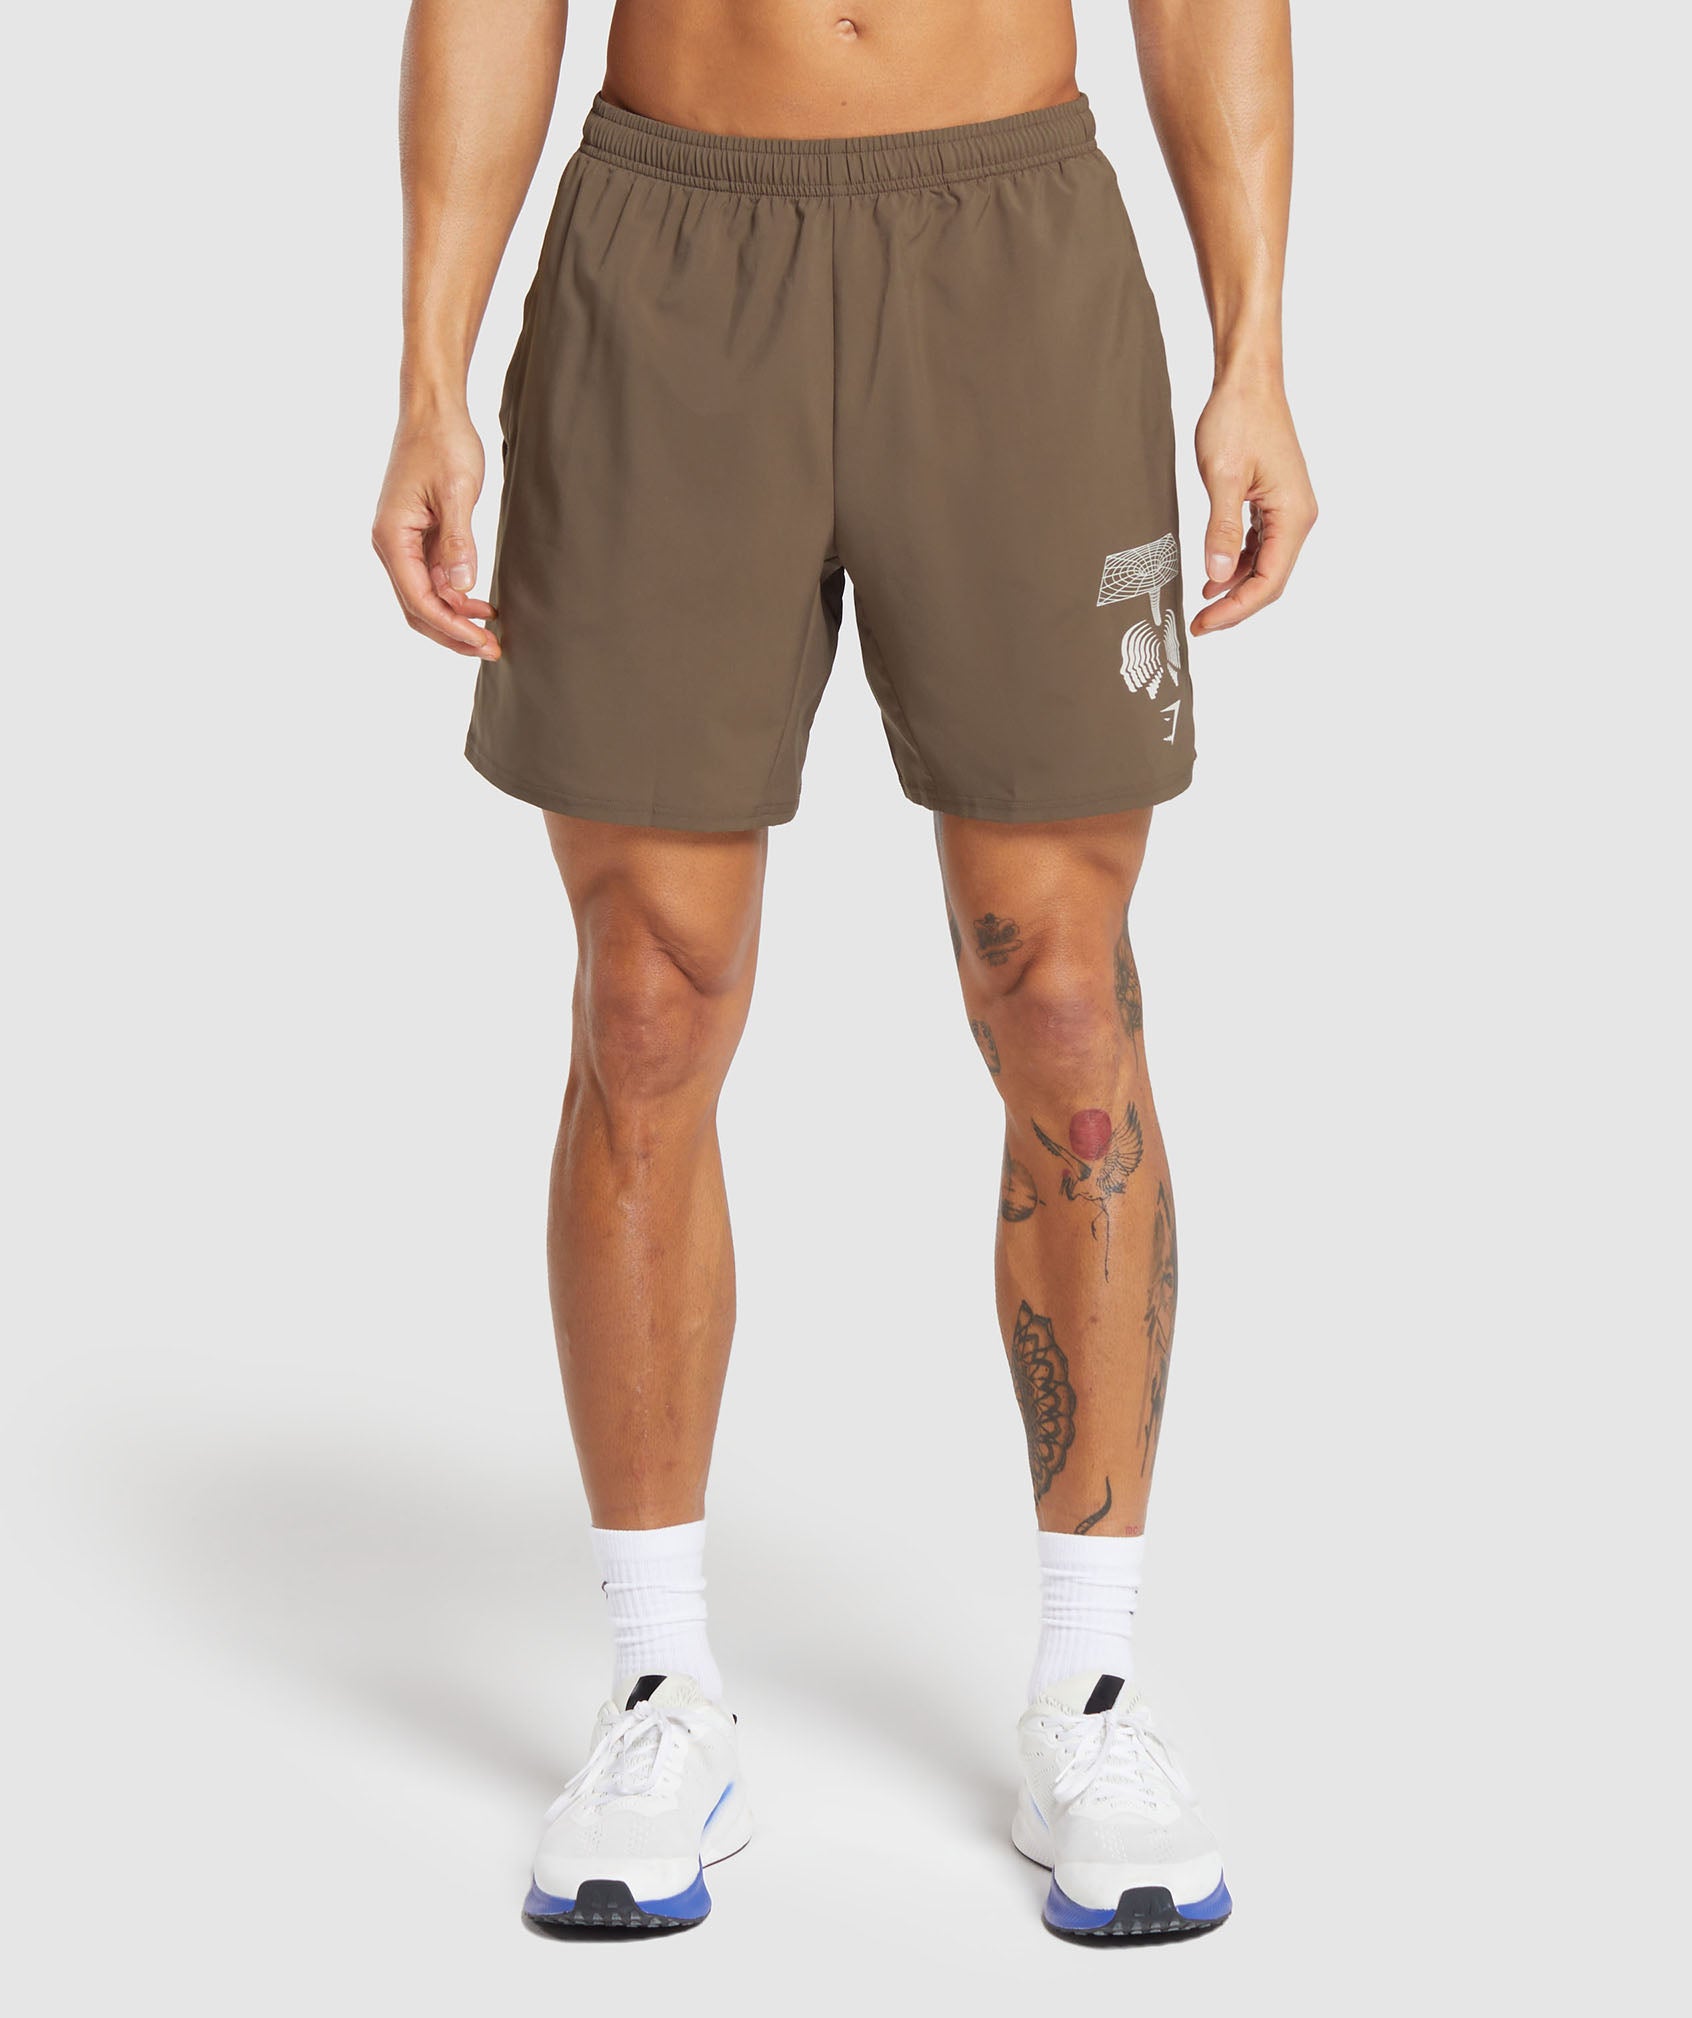 Hybrid Wellness 7" Shorts in Penny Brown - view 1